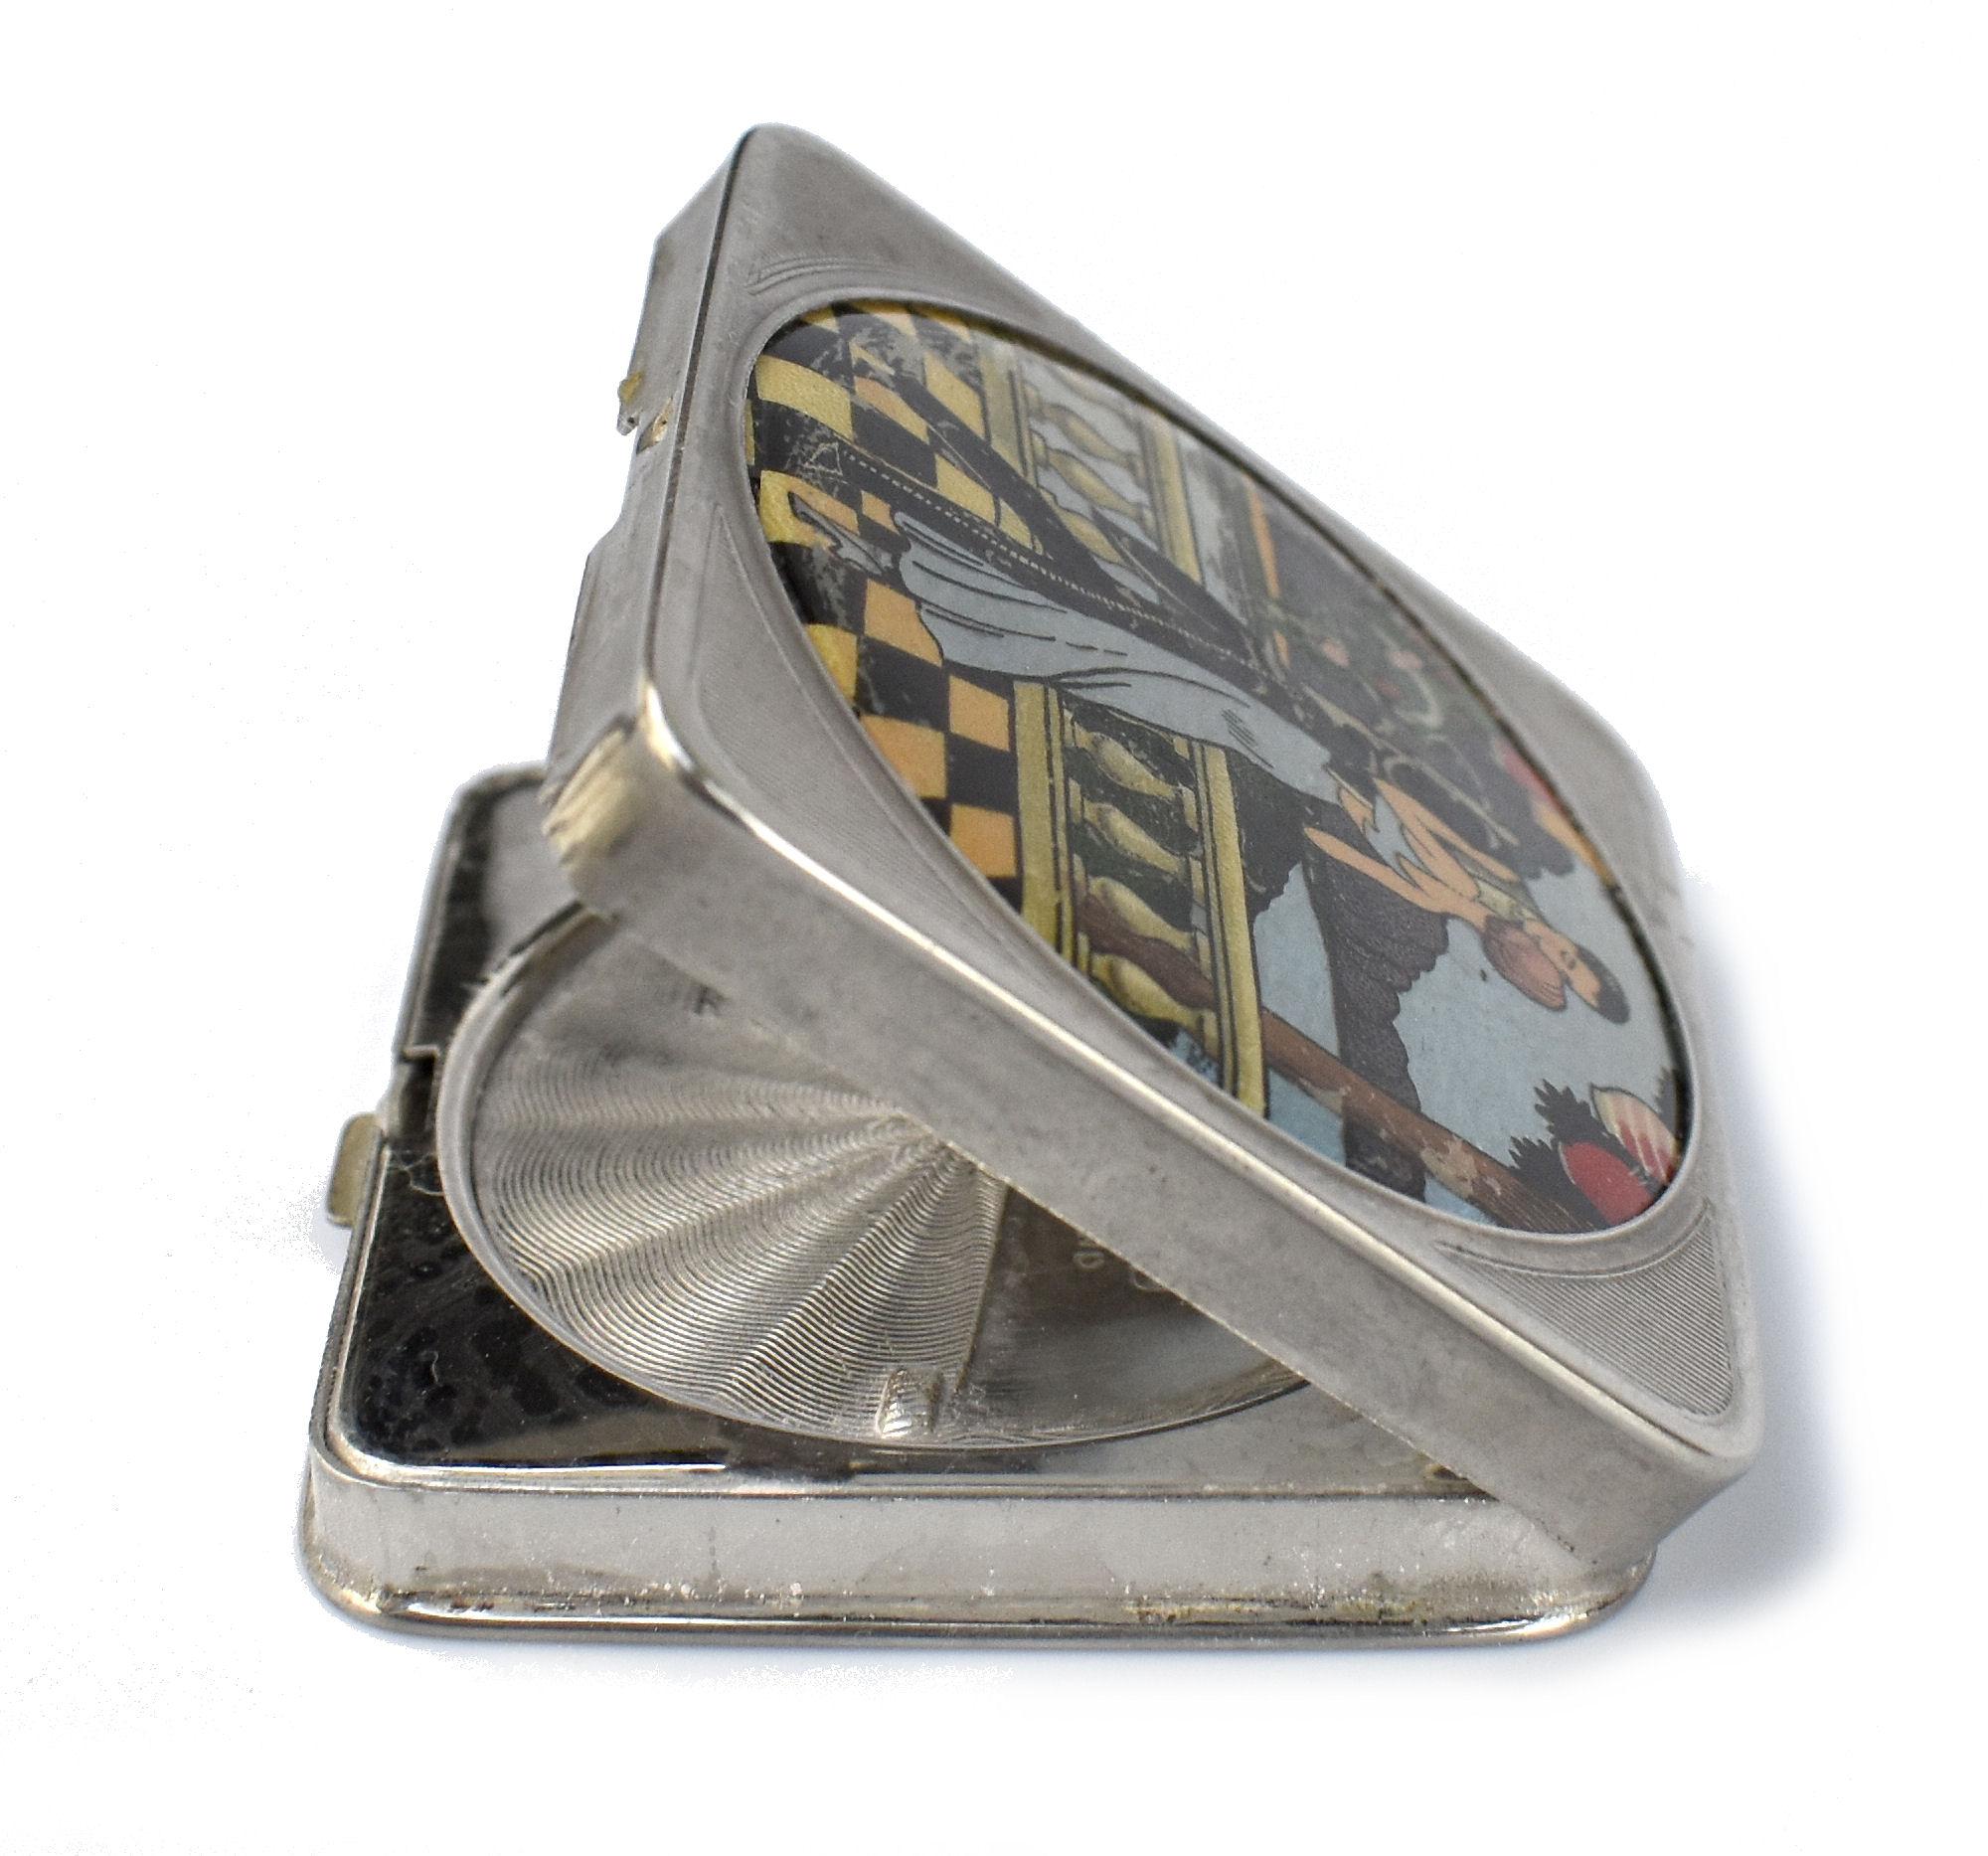 Mirror Art Deco Foiled Backed Stratnoid 1930's Ladies Powder Compact